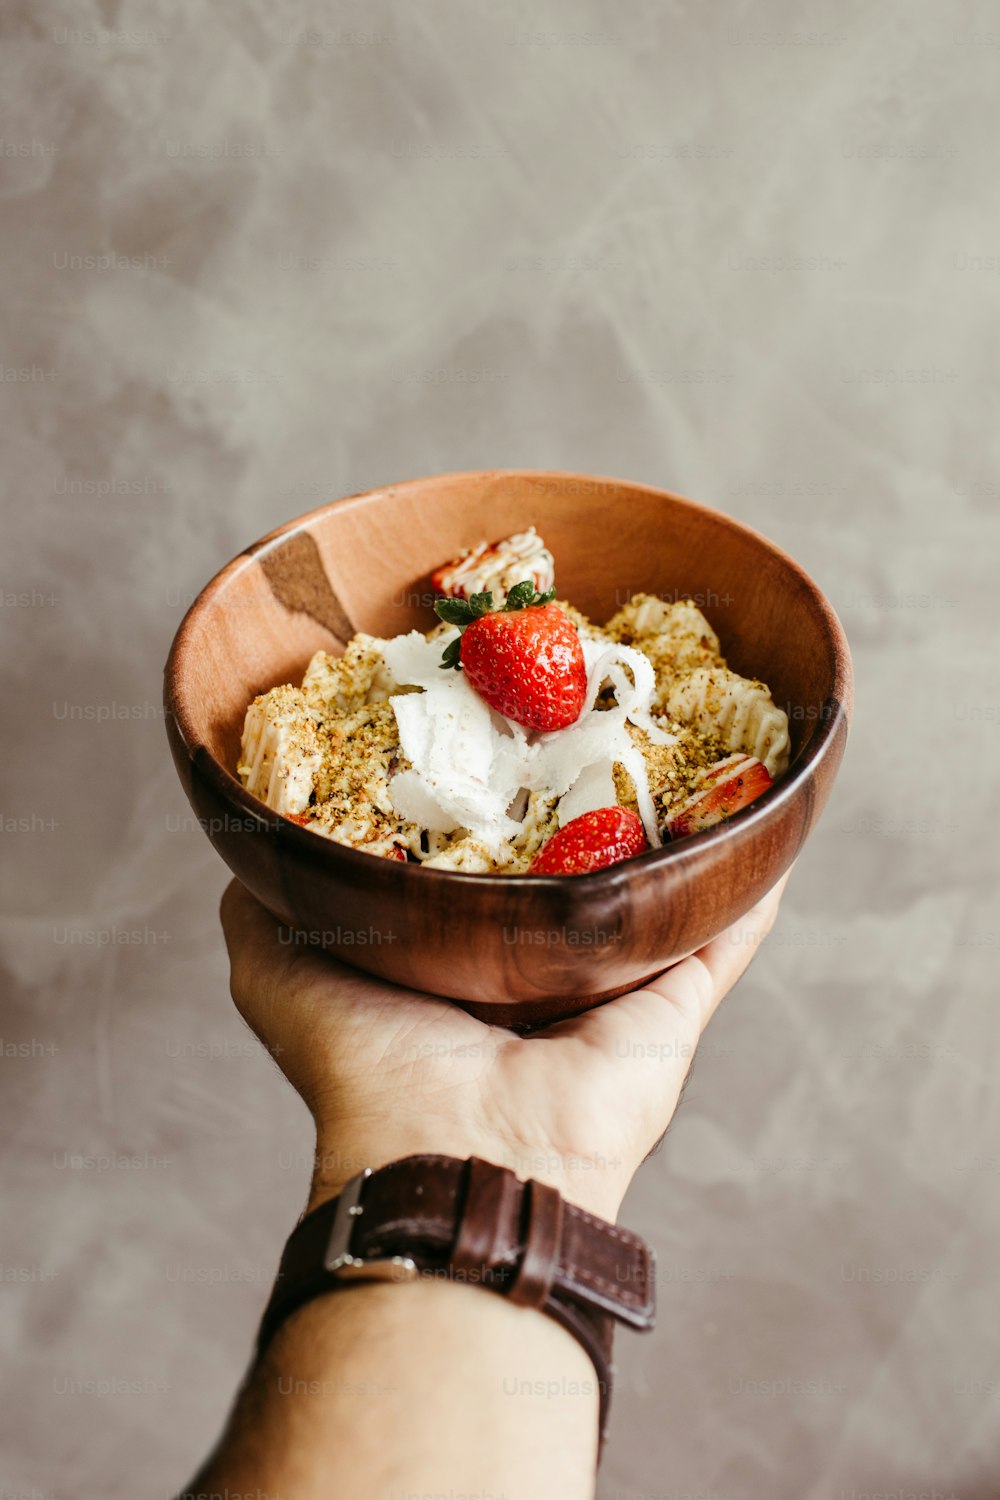 a person holding a bowl of cereal with strawberries